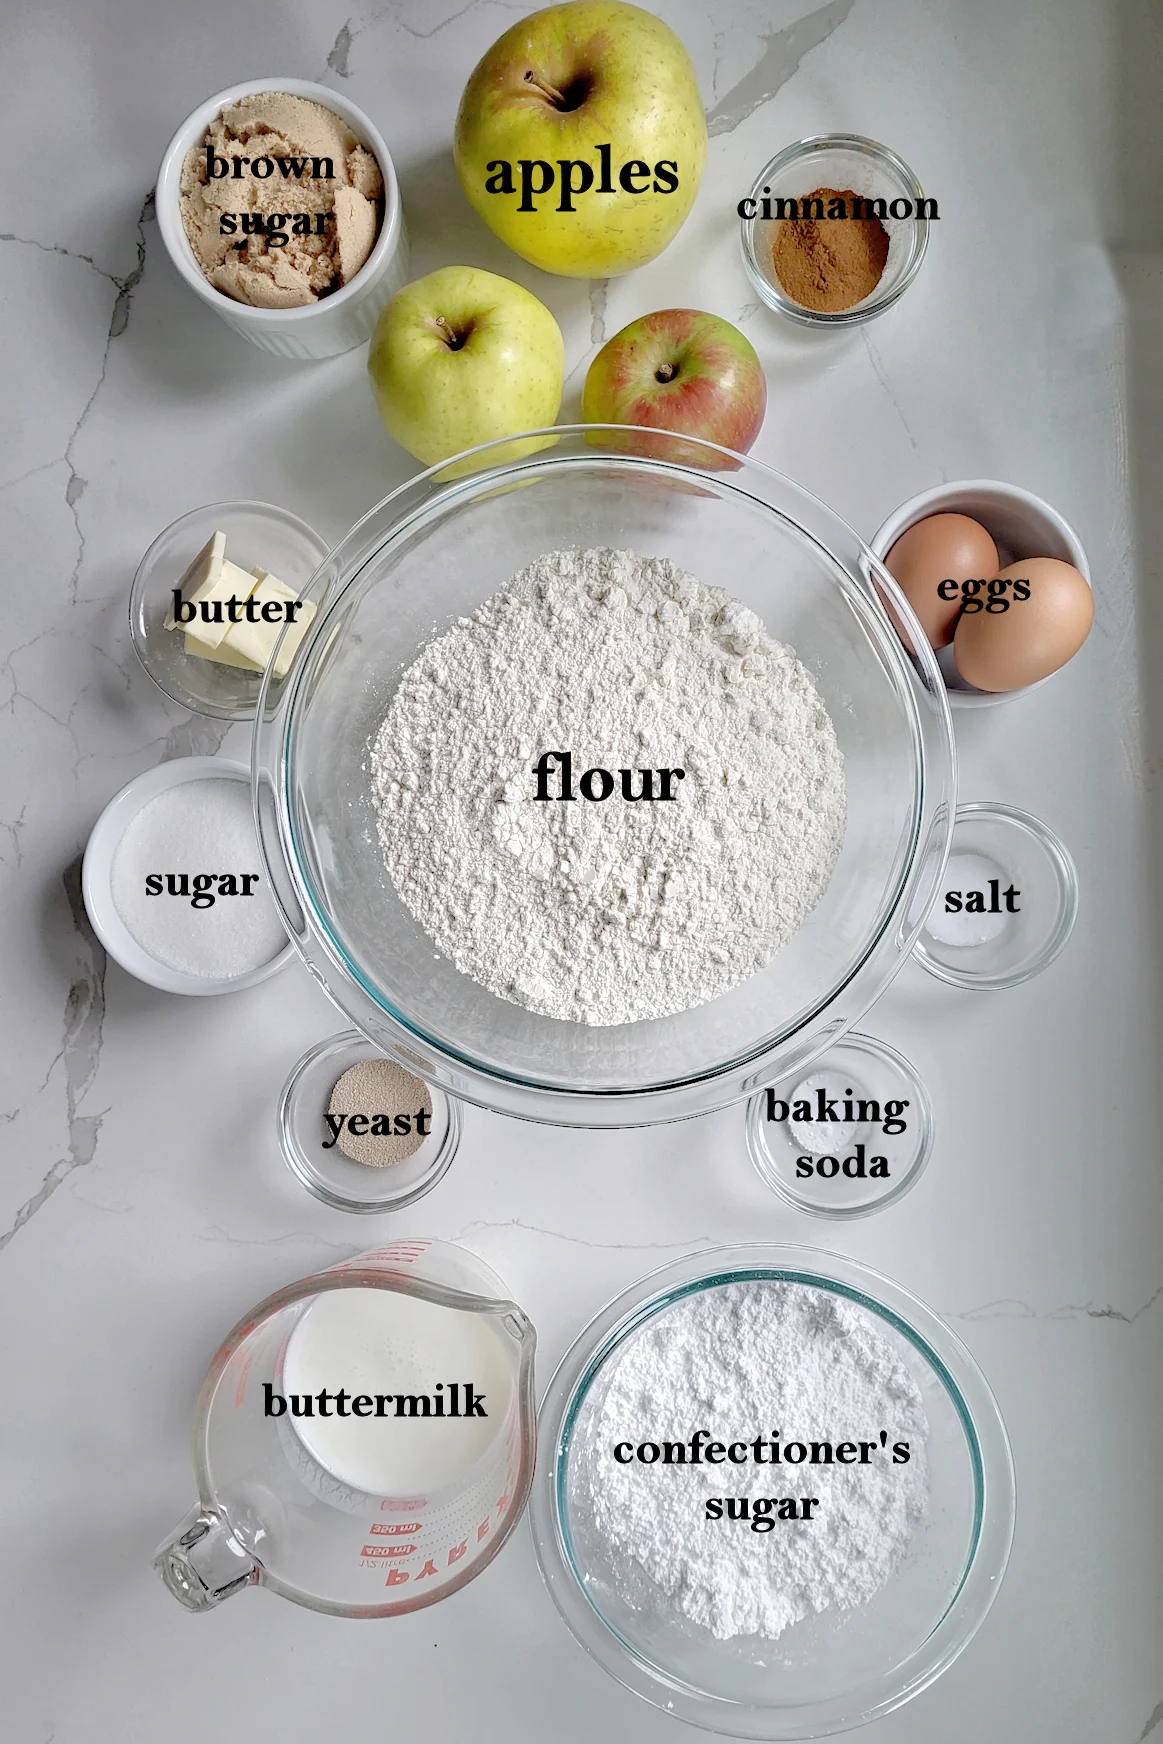 baking ingredients in bowls on a white surface.